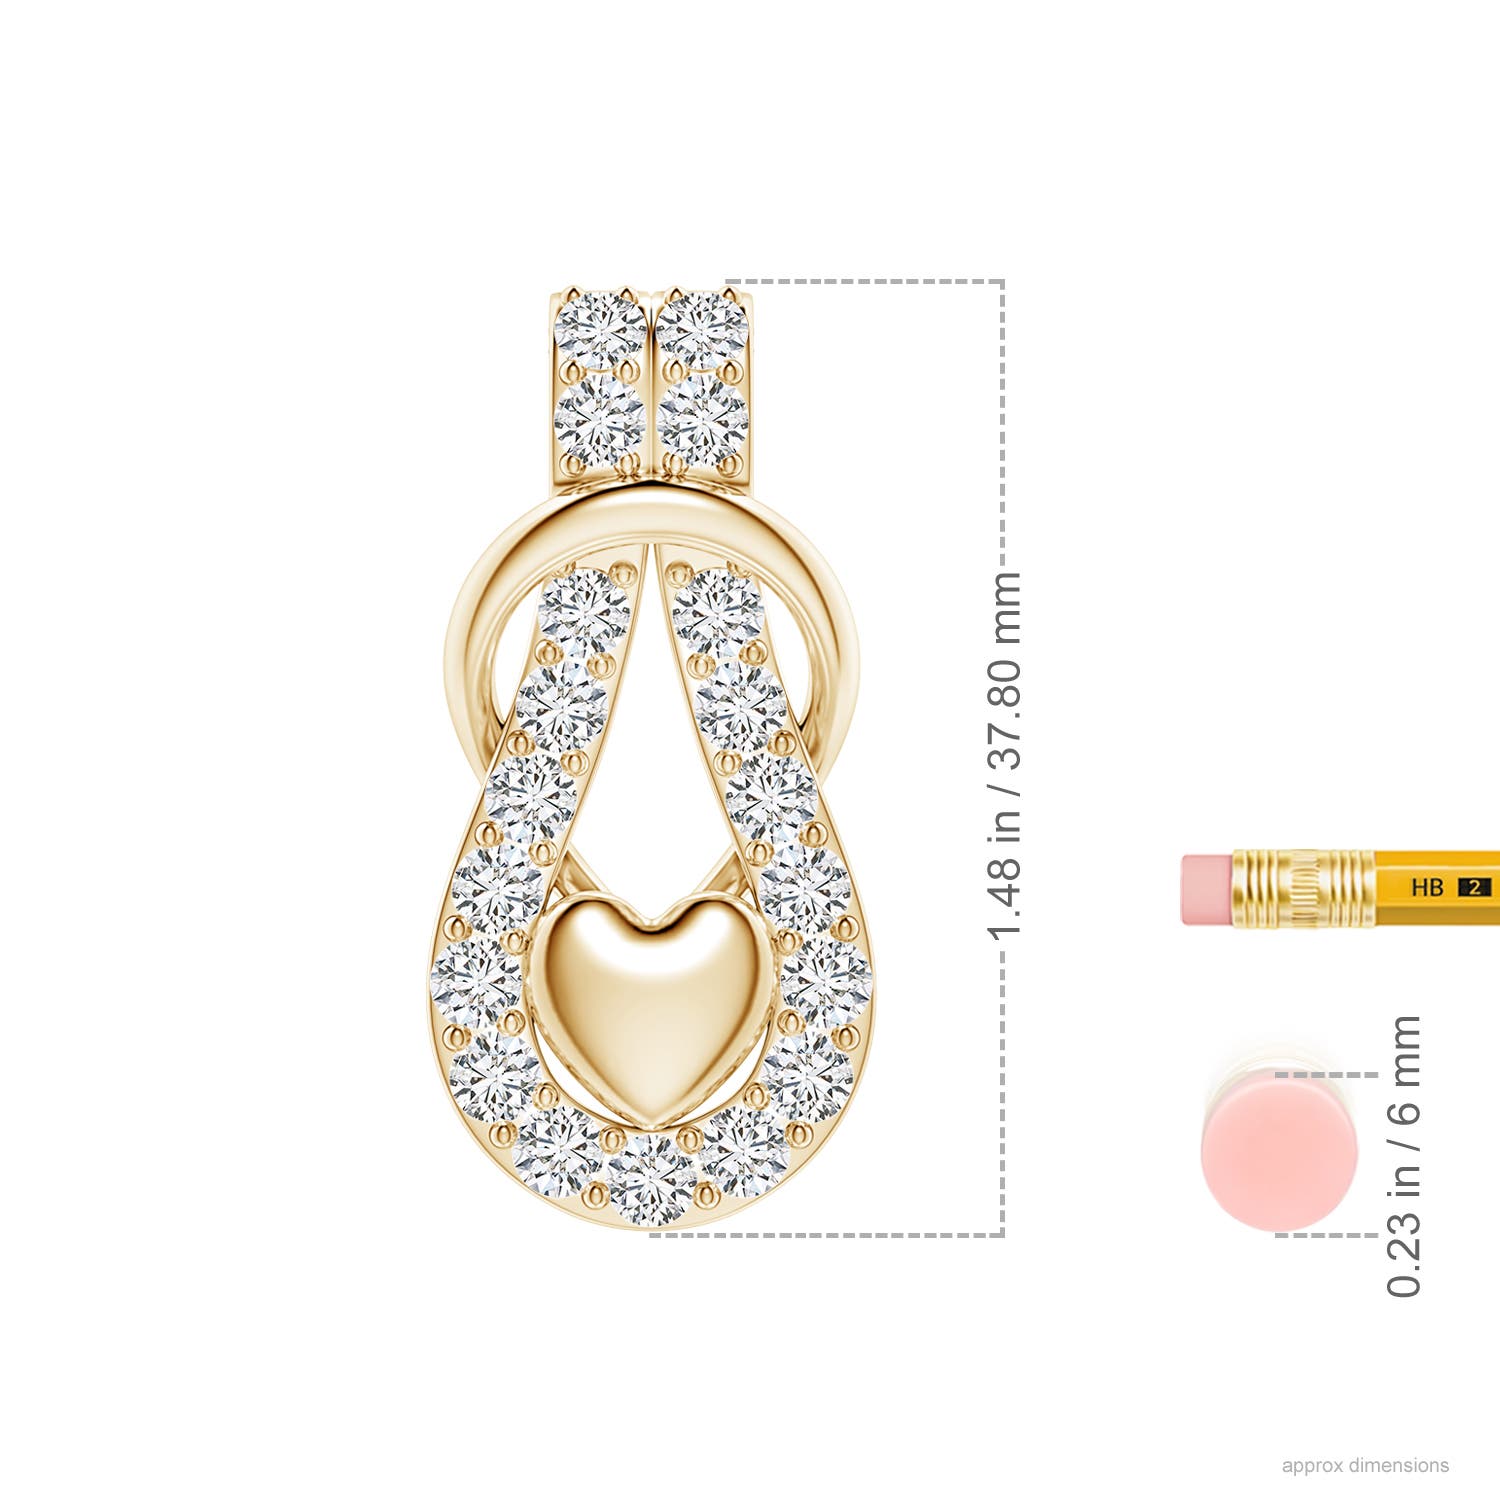 H, SI2 / 3.02 CT / 18 KT Yellow Gold